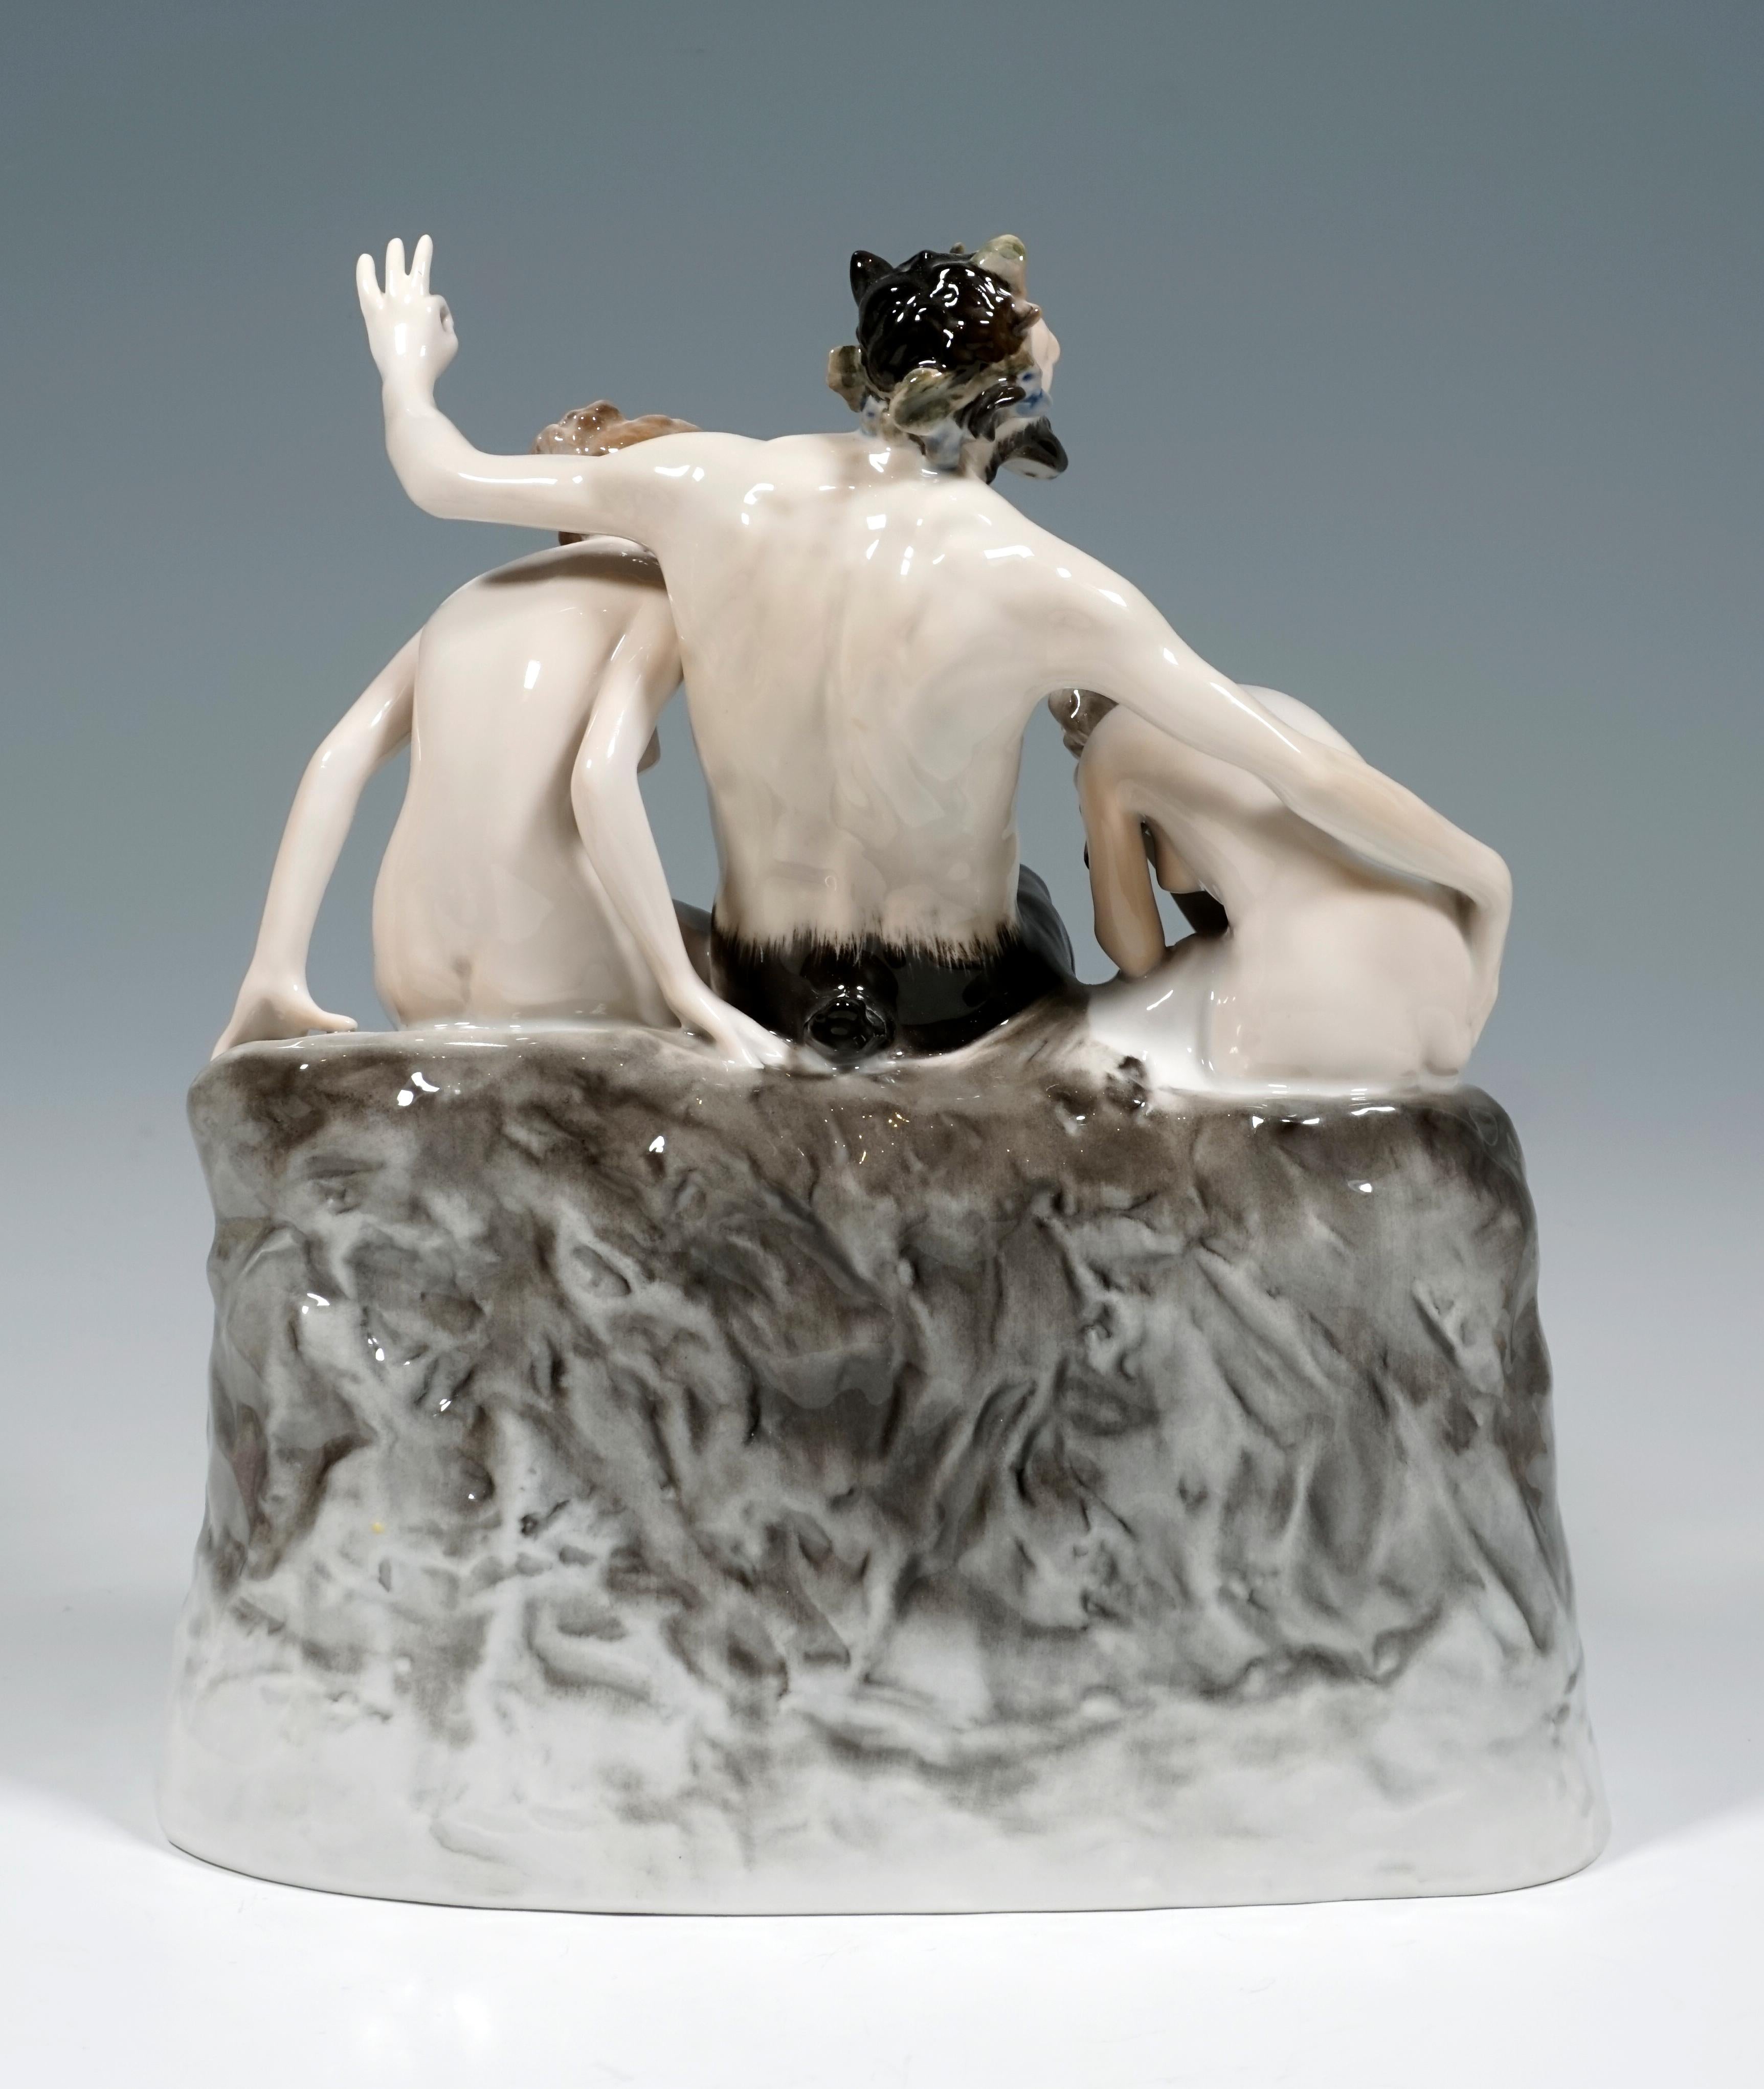 Hand-Crafted Porcelain Group 'The Sin', Faun with Nymphs, Rosenthal Selb Germany, 1917